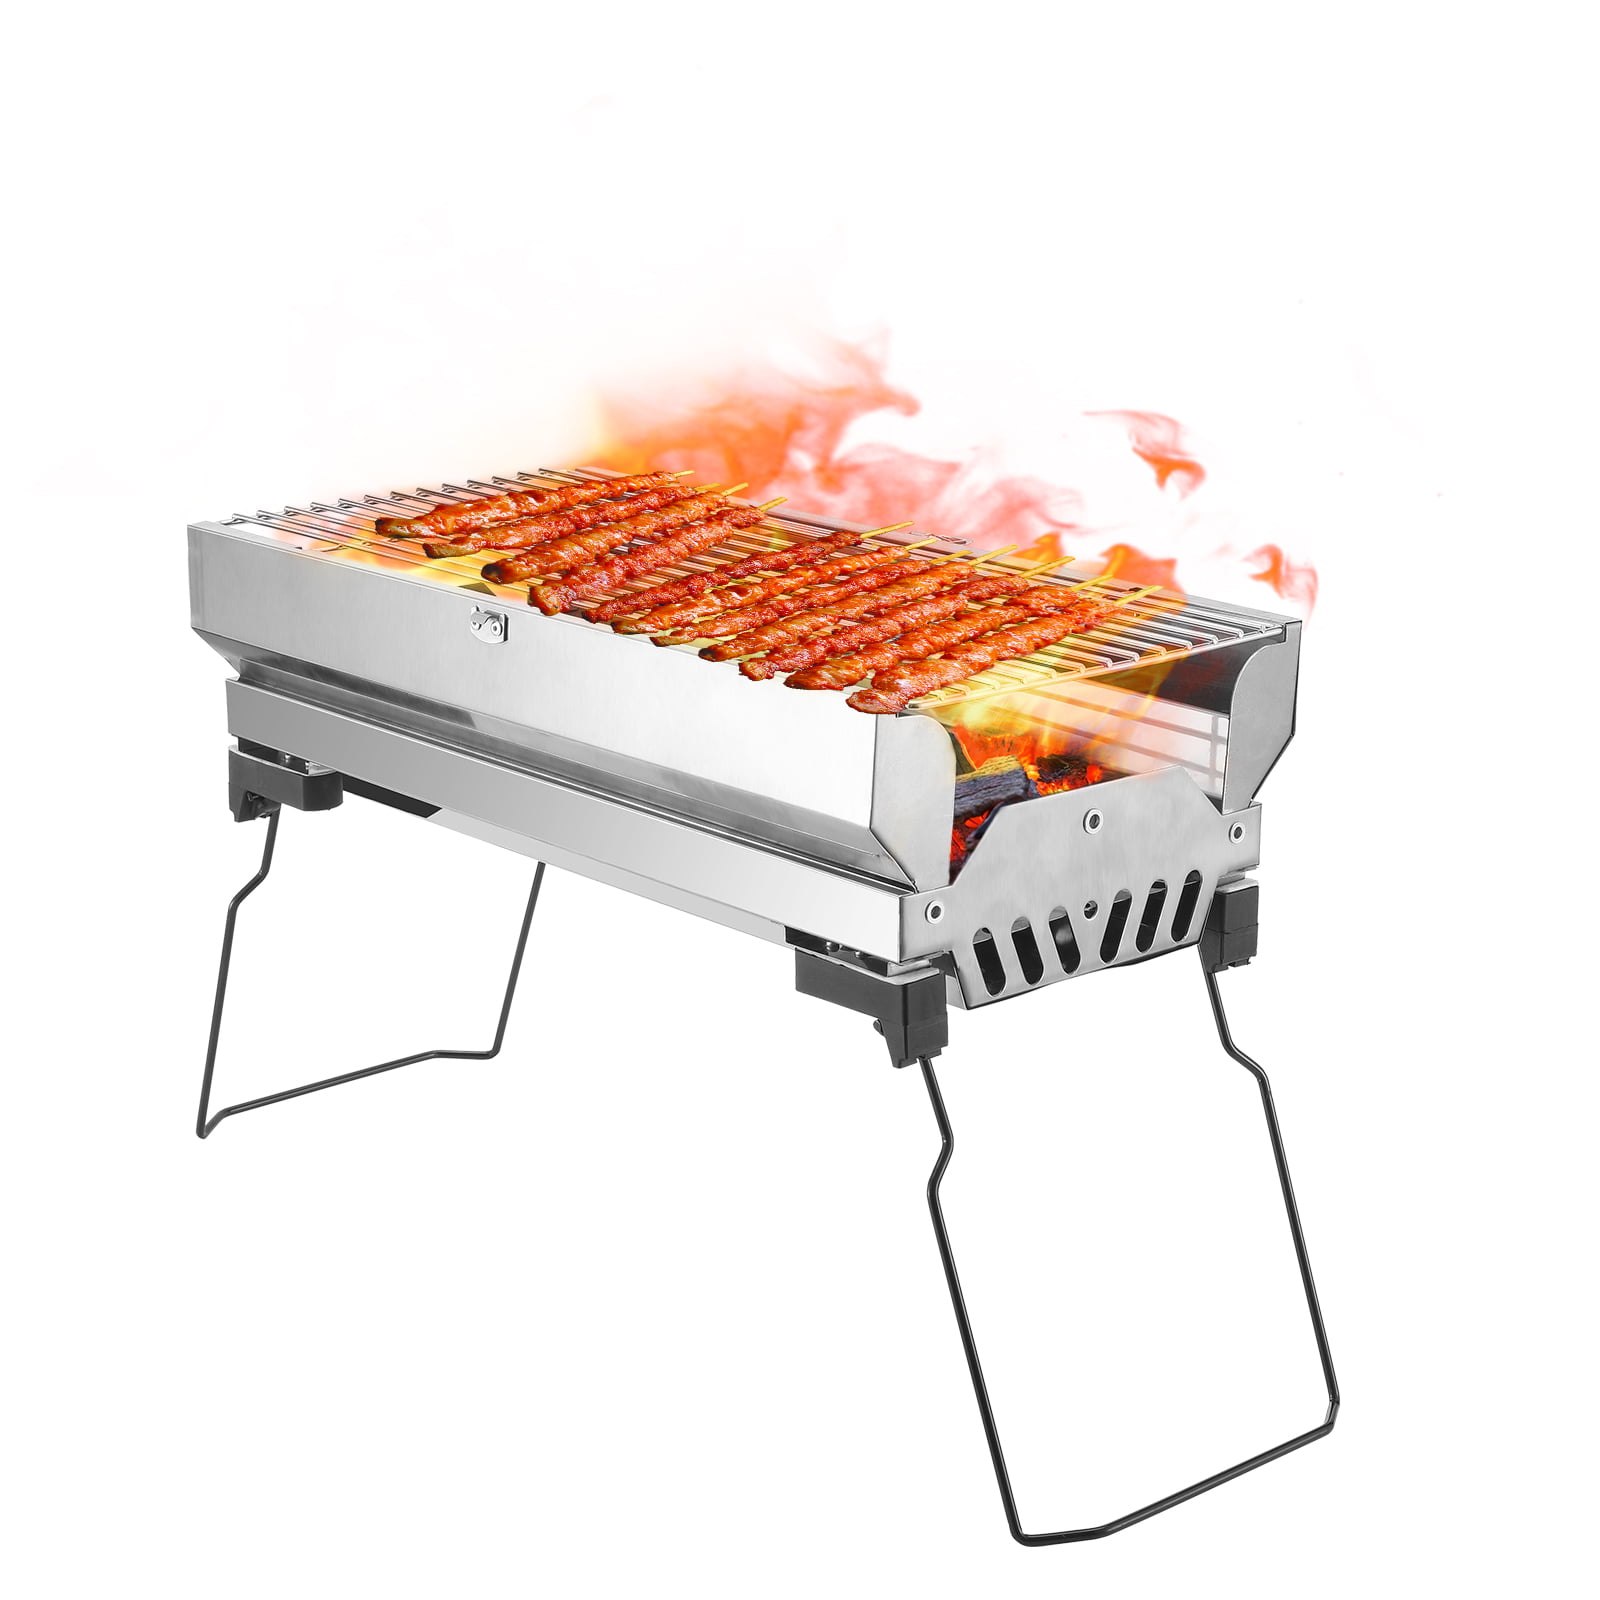 Details about   Multifunctional Grill Stainless Steel Direct Fire Barbecue Handheld Net Camping 